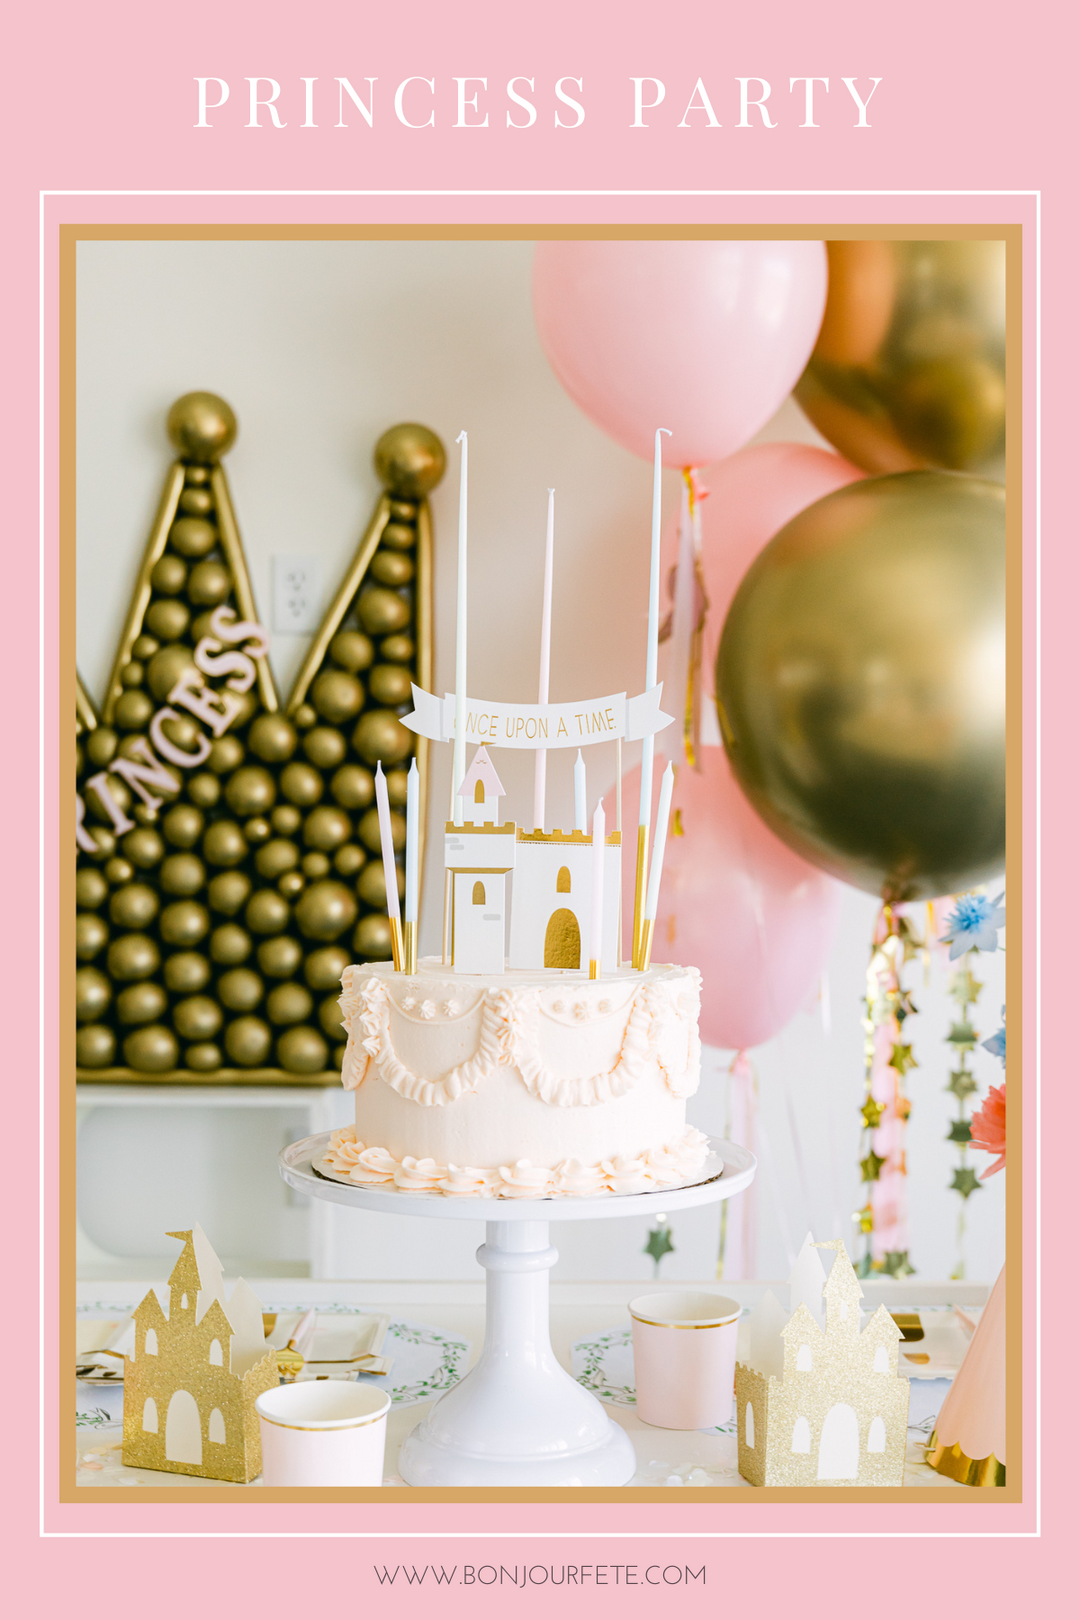 BEST PRINCESS BIRTHDAY PARTY IDEAS AND DECORATIONS